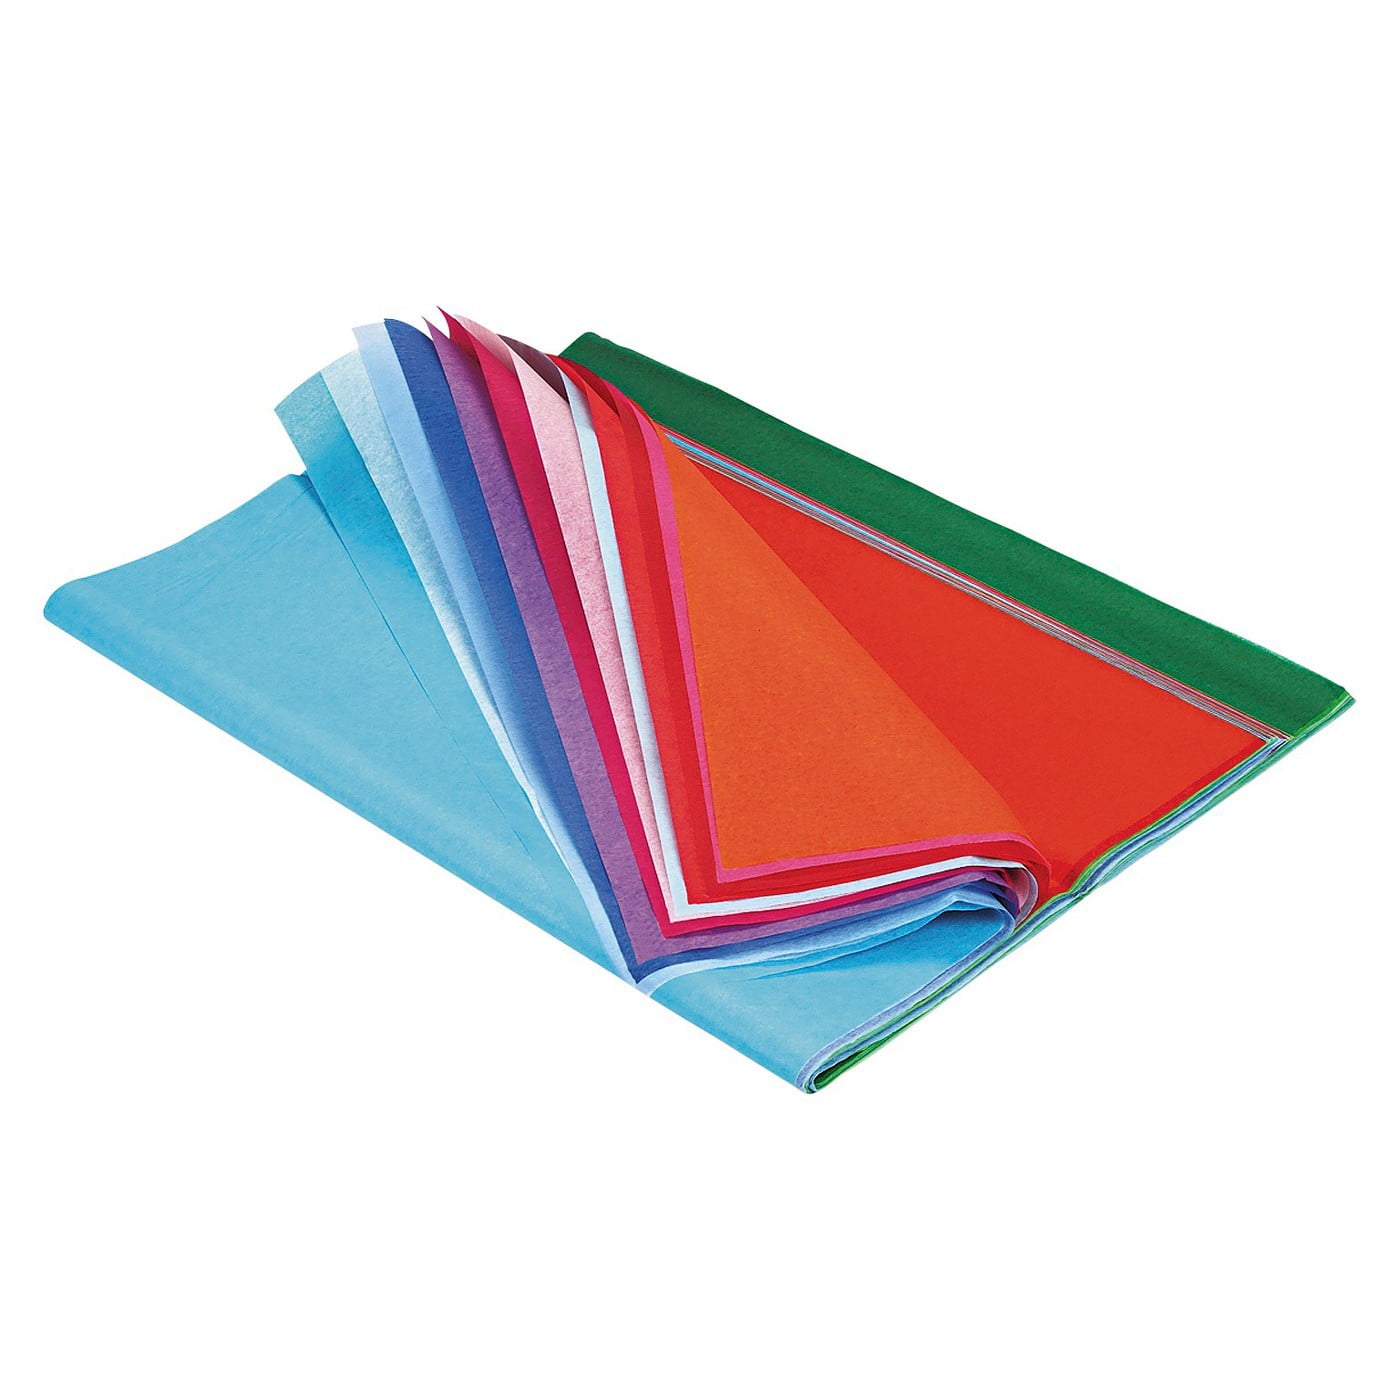 Types of tissue paper